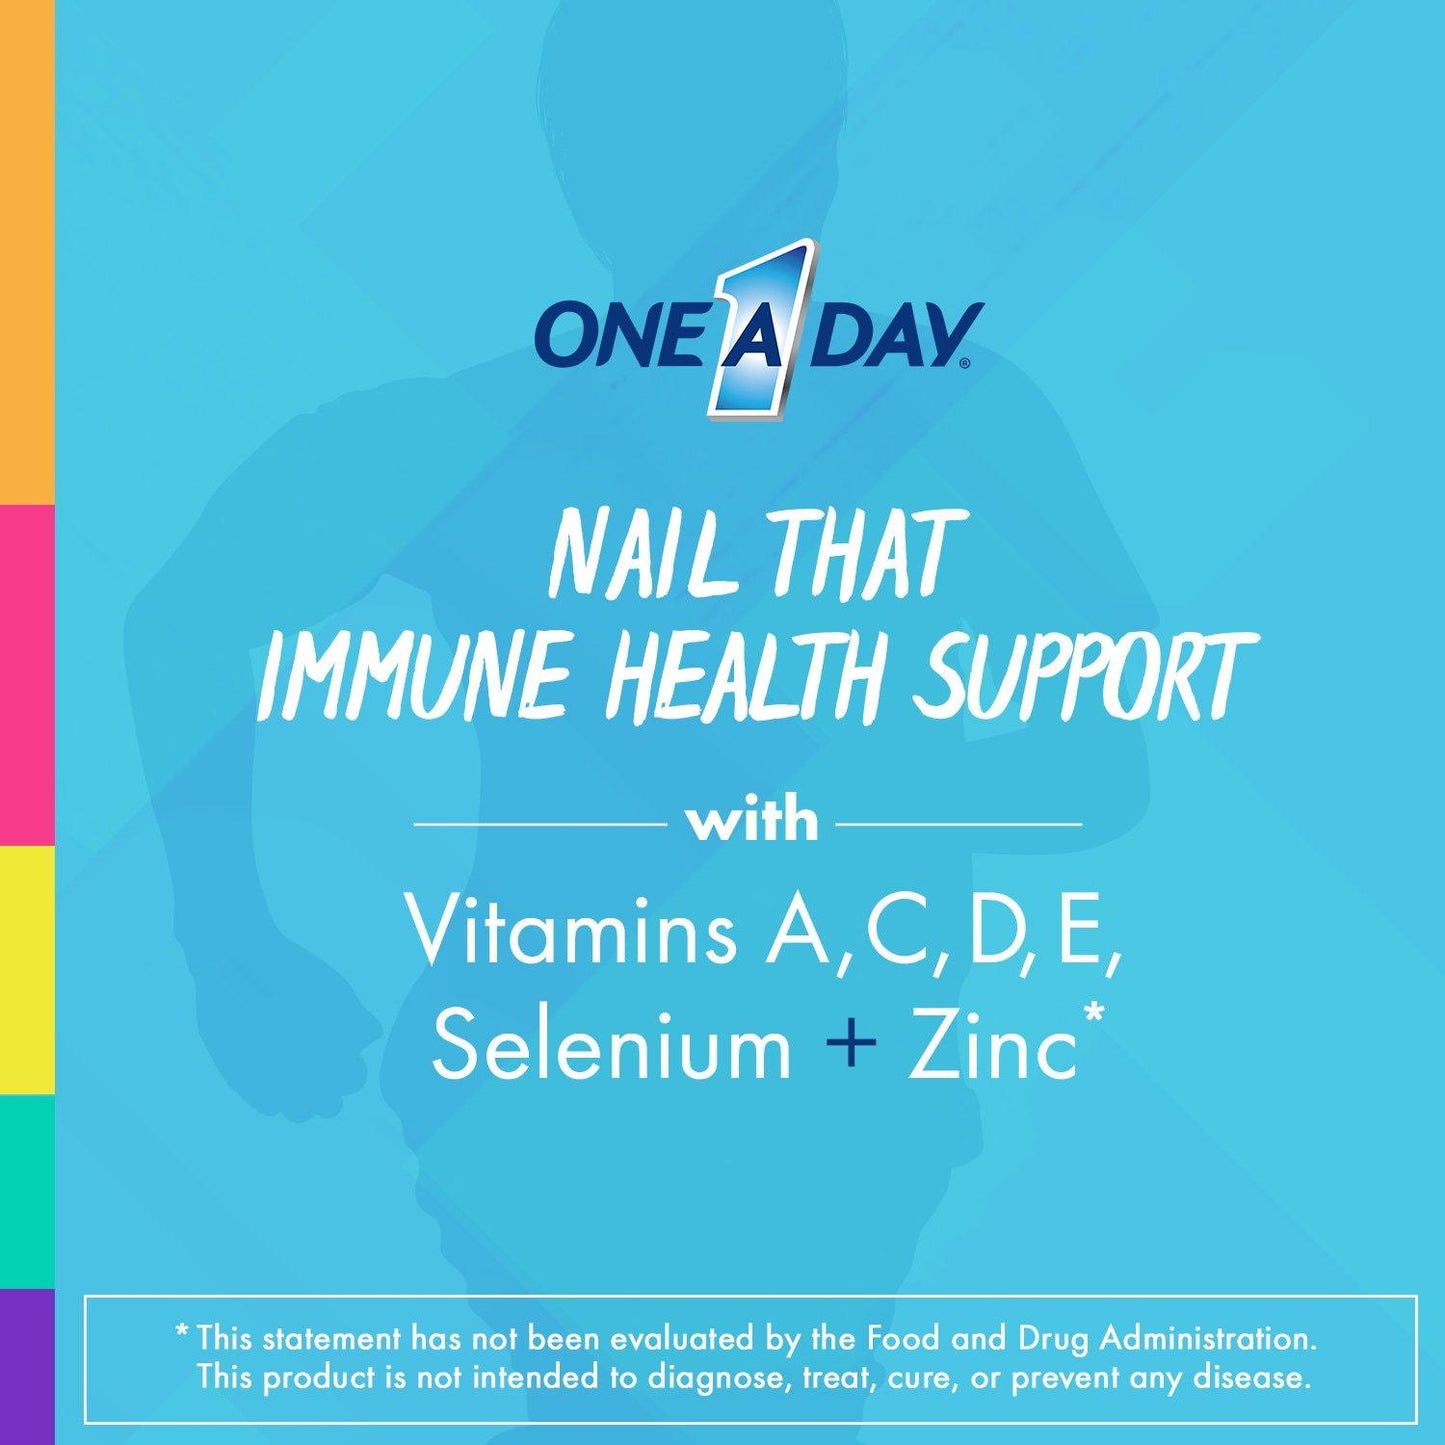 One A day Men’s Multivitamin Nutritional Support for 6 Key Vital Functions - 200 Tablets